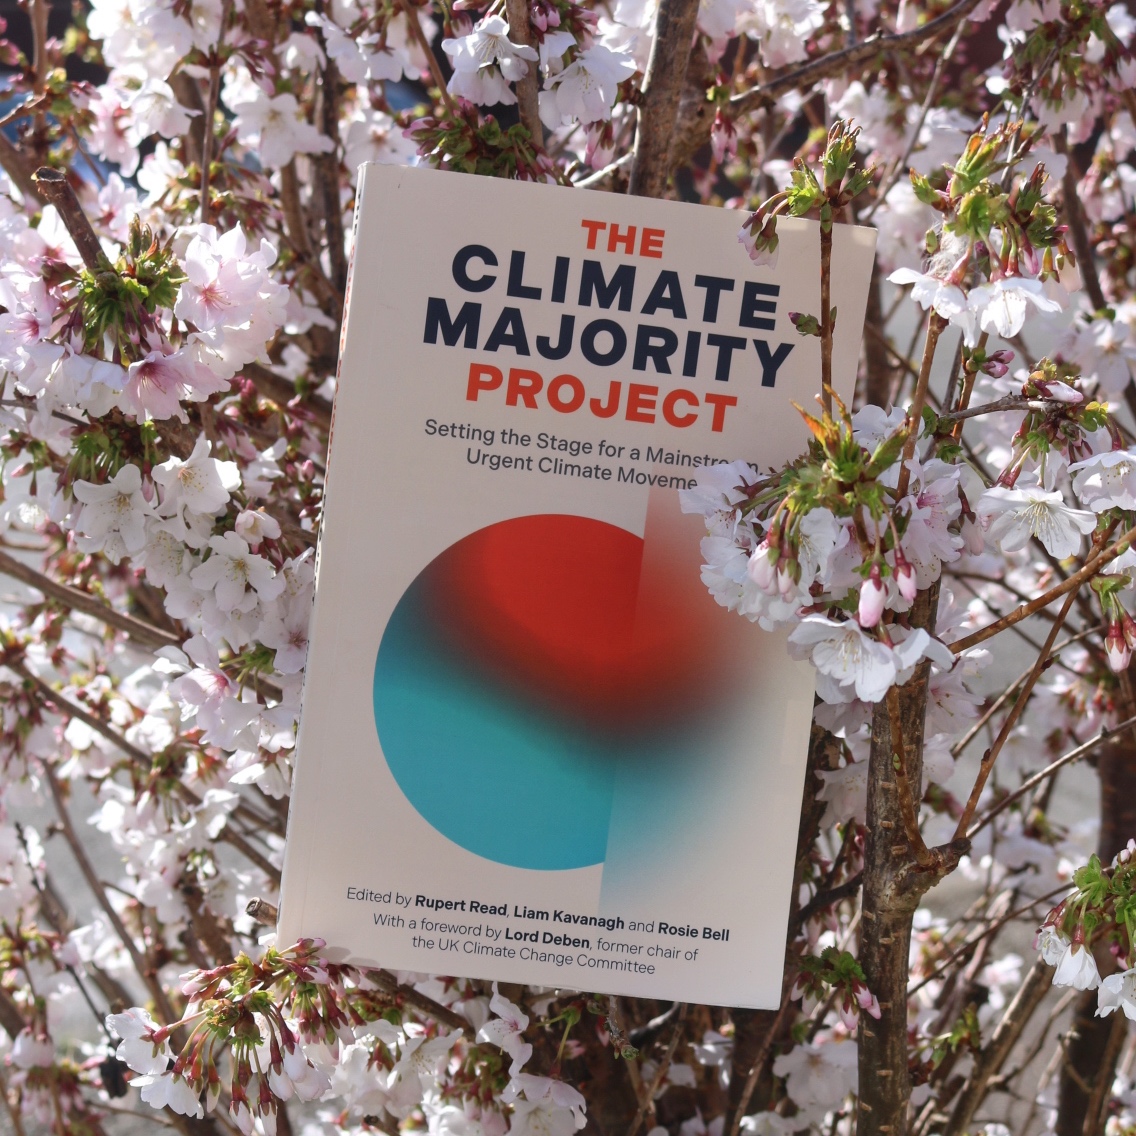 “Resolving the #climate crisis will require far greater commitment and action from ‘ordinary people’ than we have seen to date. This #book is seeking to stimulate that action.” Prof Paul Ekins. 🌸Grab your copy 👇 #ClimateMajorityProject londonpublishingpartnership.co.uk/climate-majori…